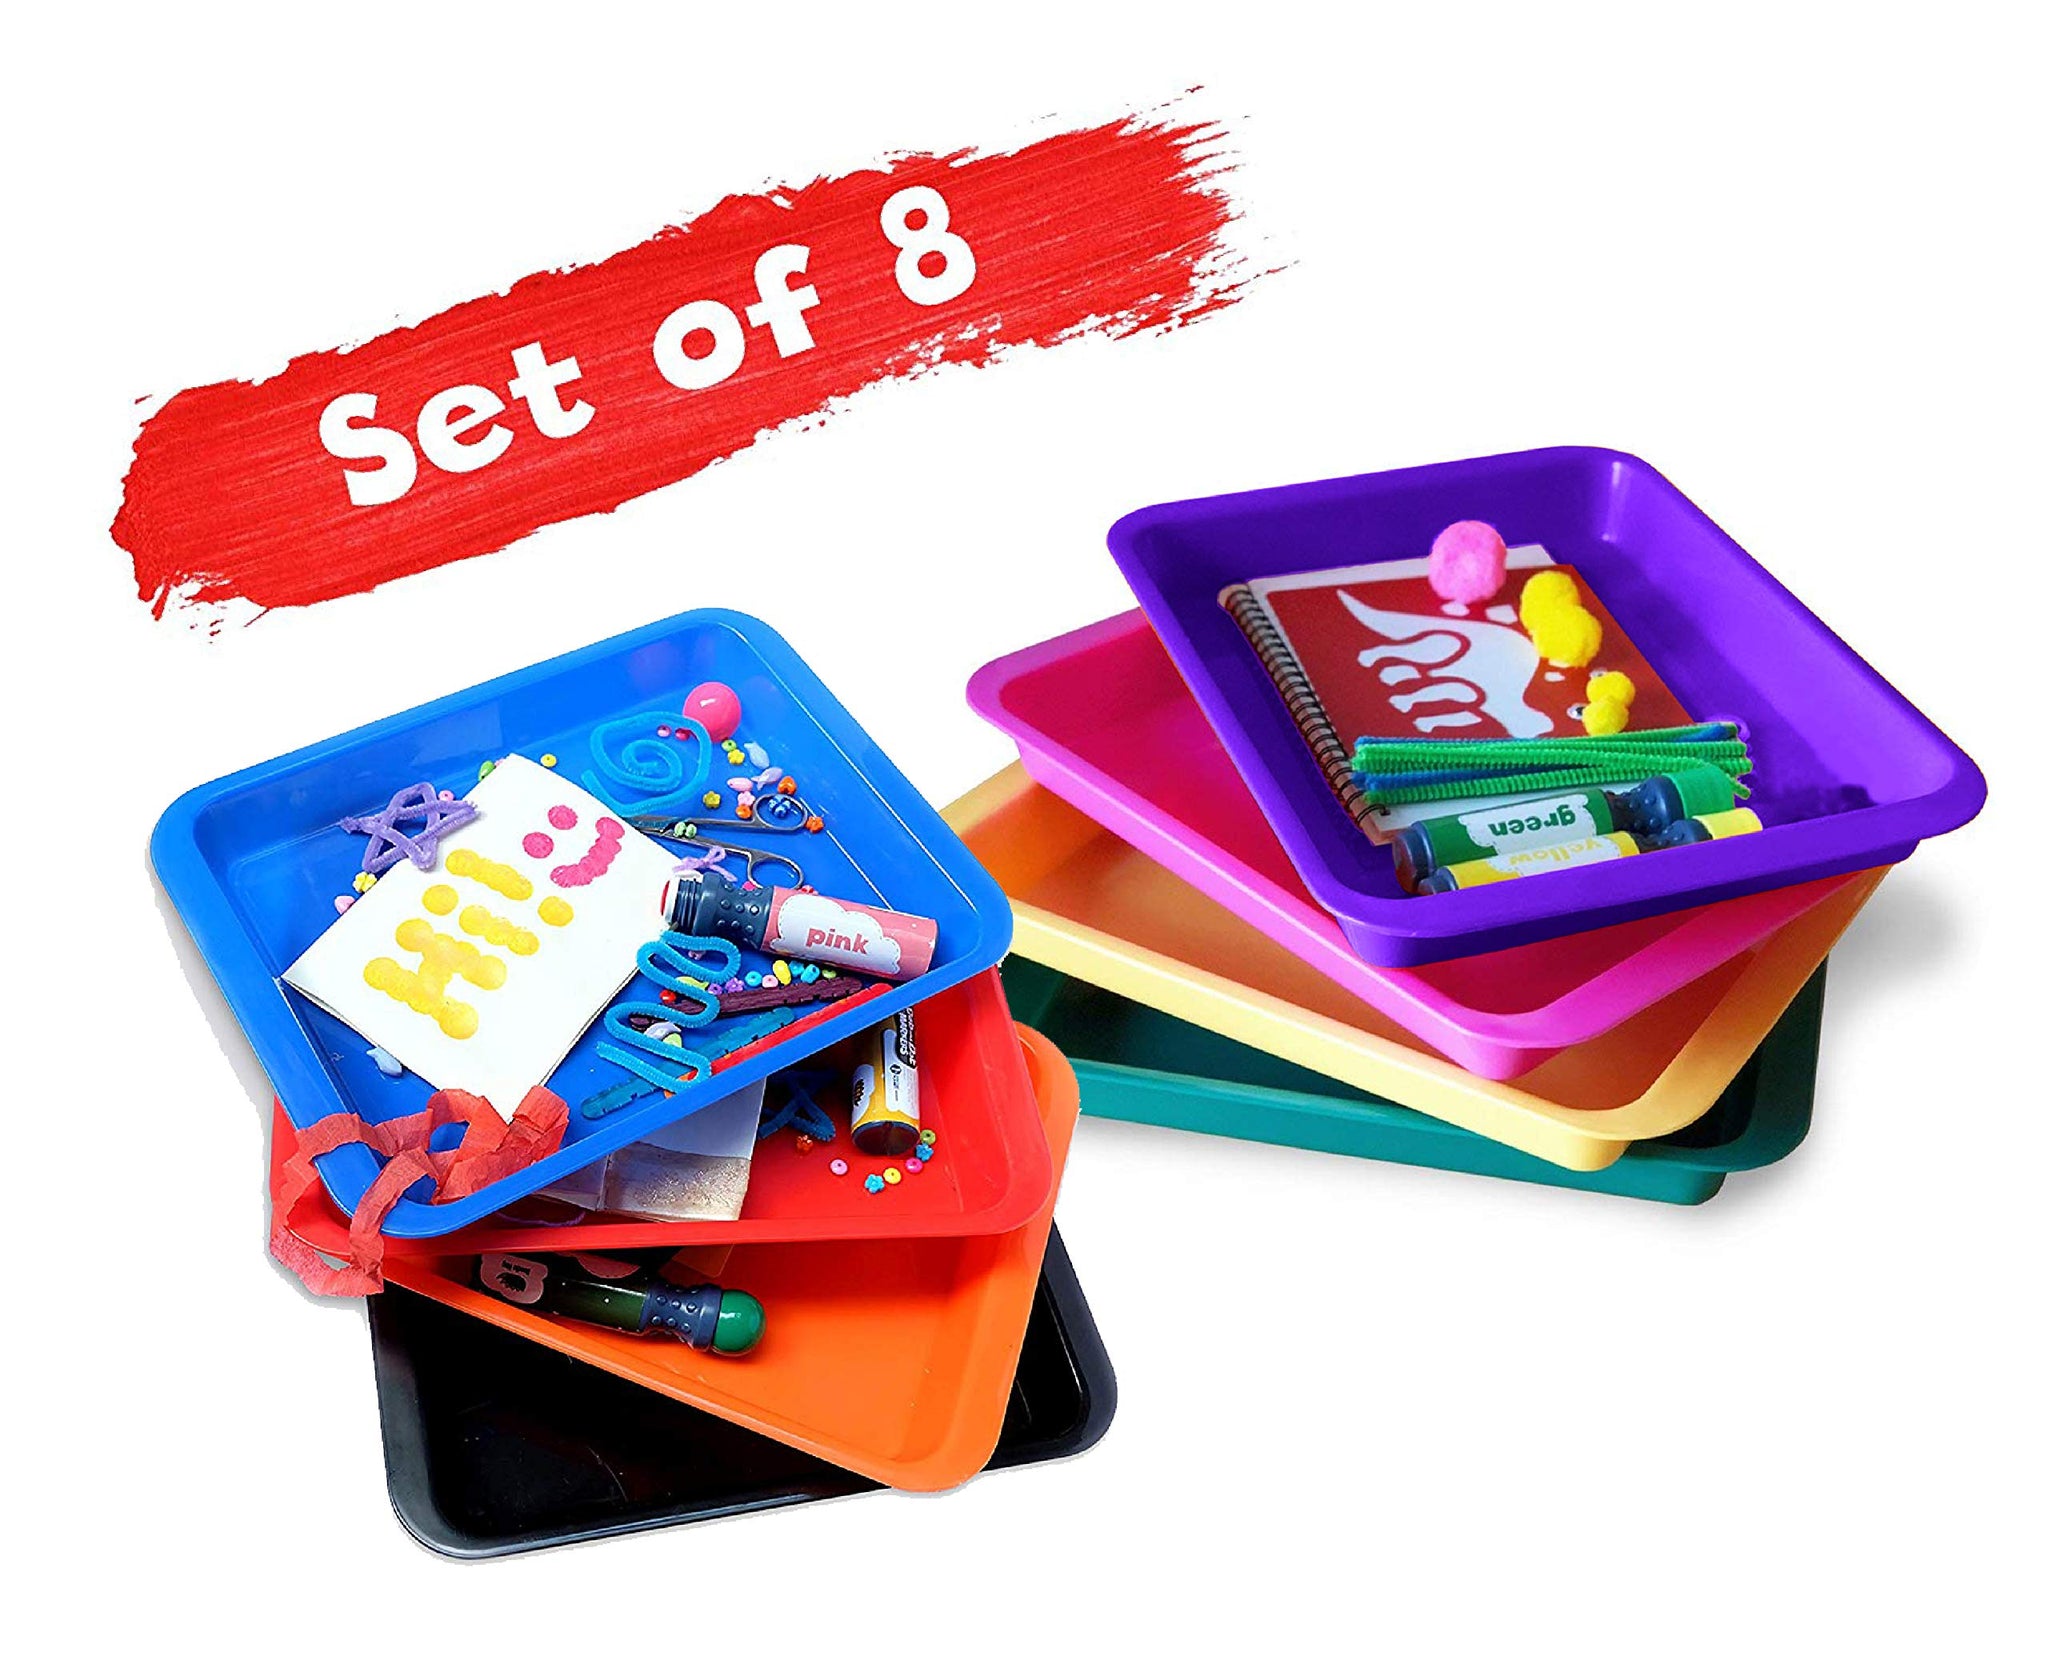 10 Pack Plastic Art Trays,Activity Plastic Crafts Tray,Multicolor Serving  Organizer Tray for DIY Projects,Painting,Beads,Home,School